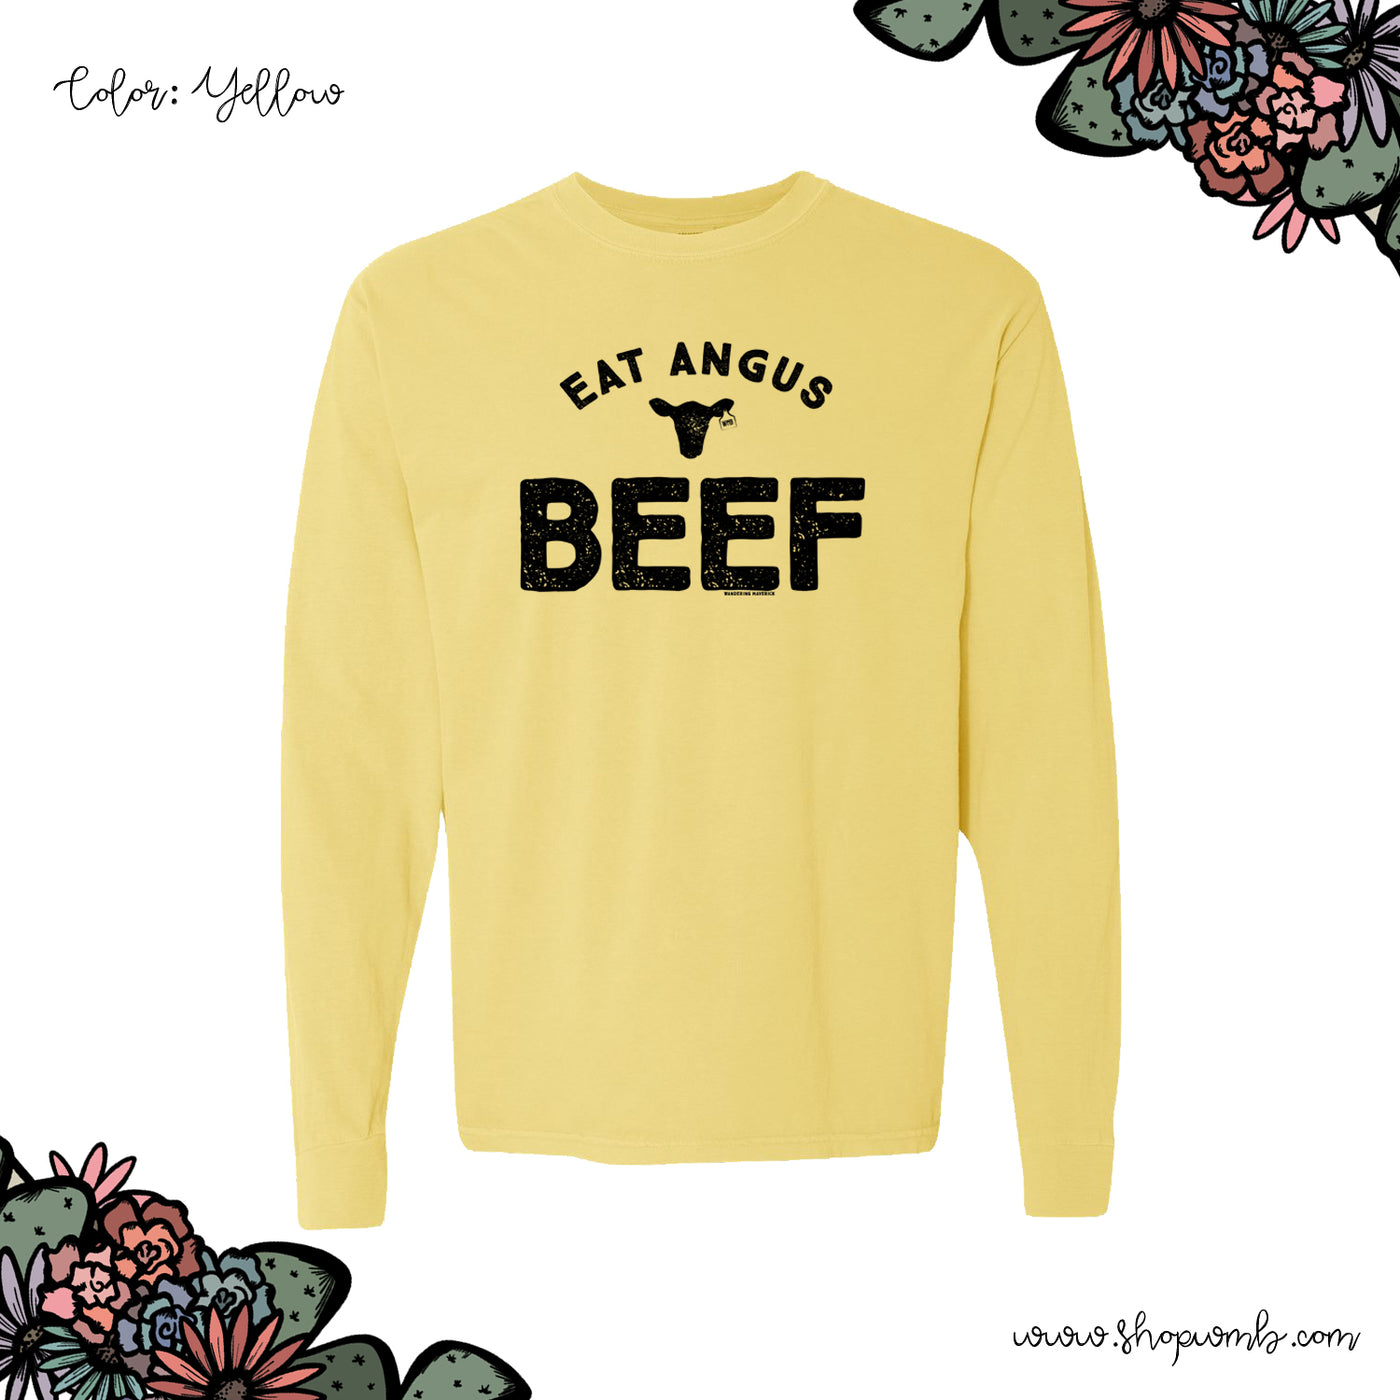 Eat Angus Beef LONG SLEEVE T-Shirt (S-3XL) - Multiple Colors!